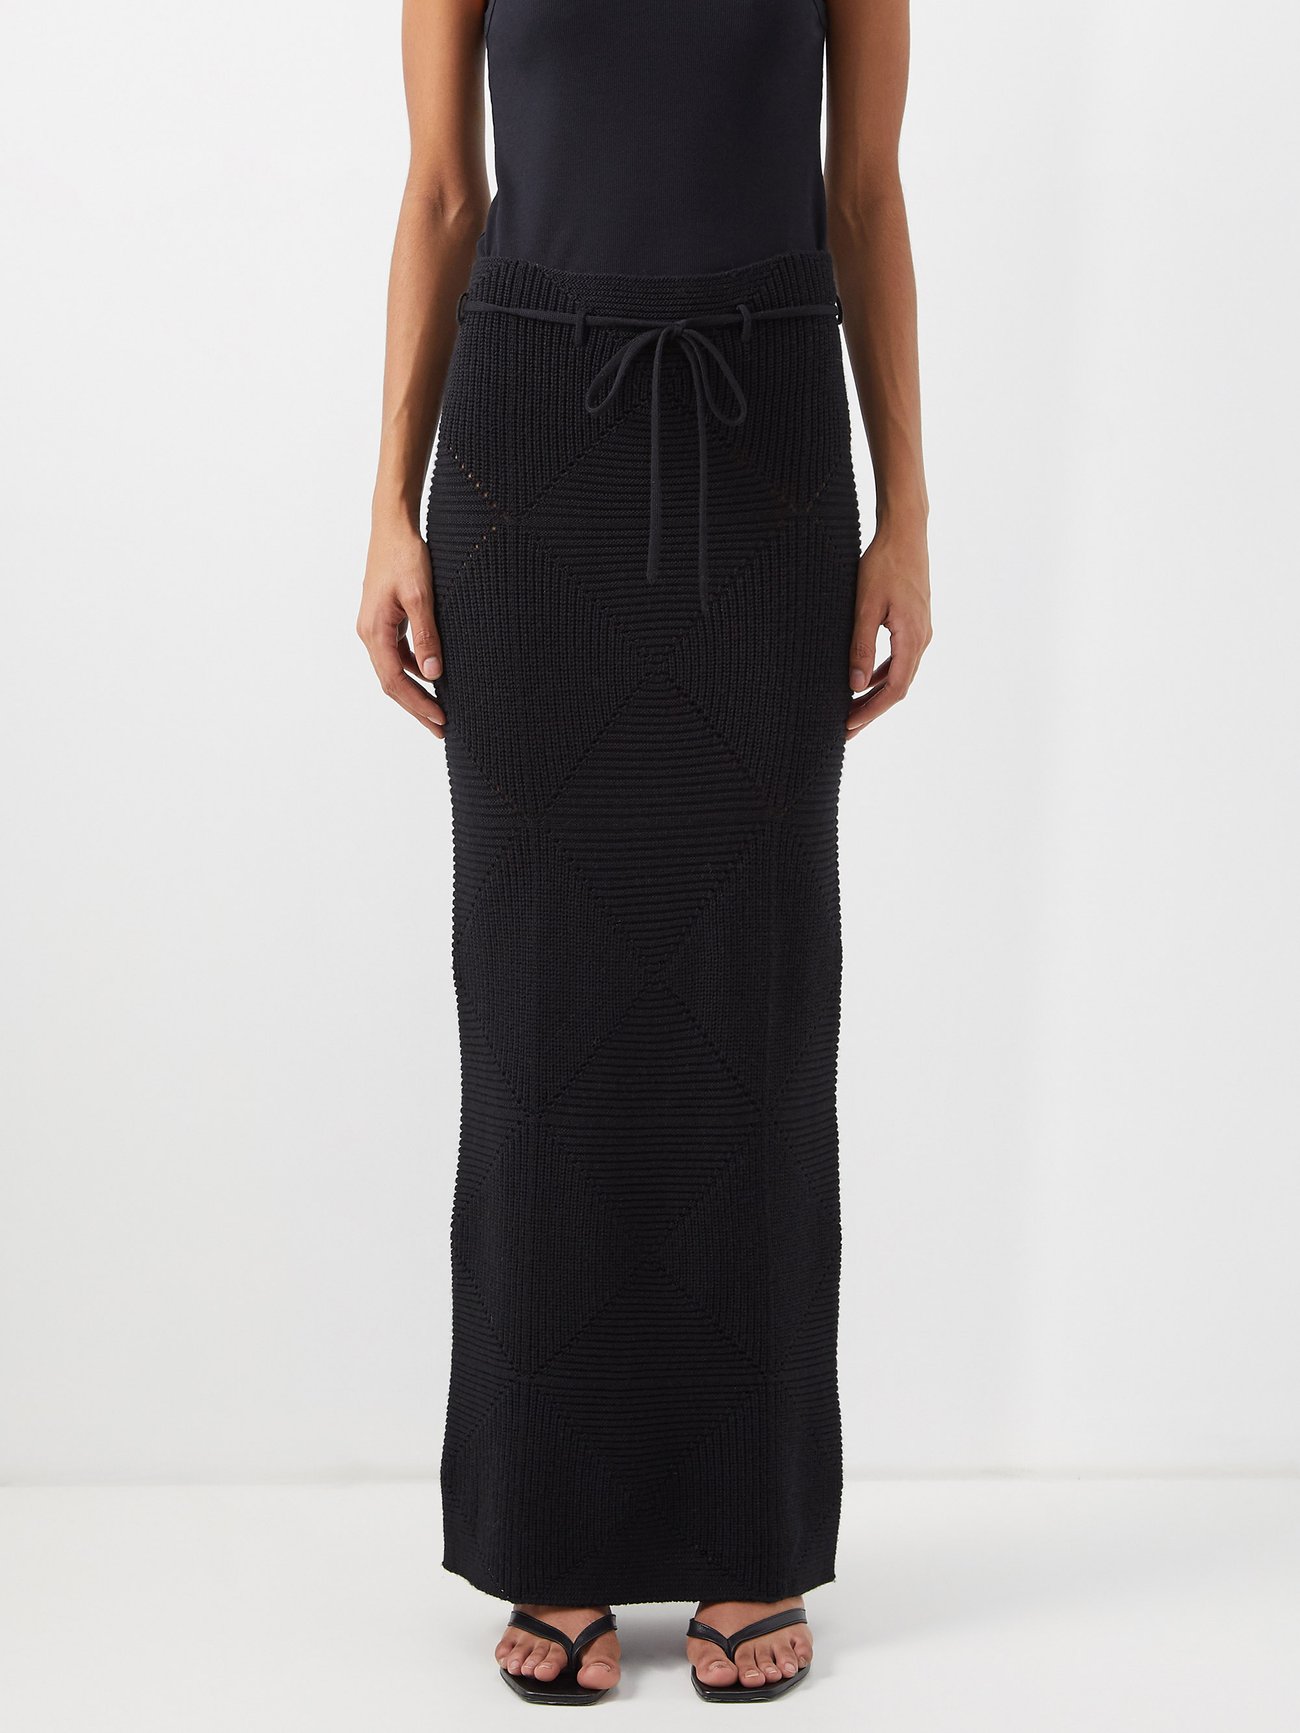 Tick off the maxi skirt trend for 2022 with Toteme’s black maxi skirt is knitted to a 1990s-inspired tube silhouette from a blend of wool and silk, and cinched with a slender tie at the waist.